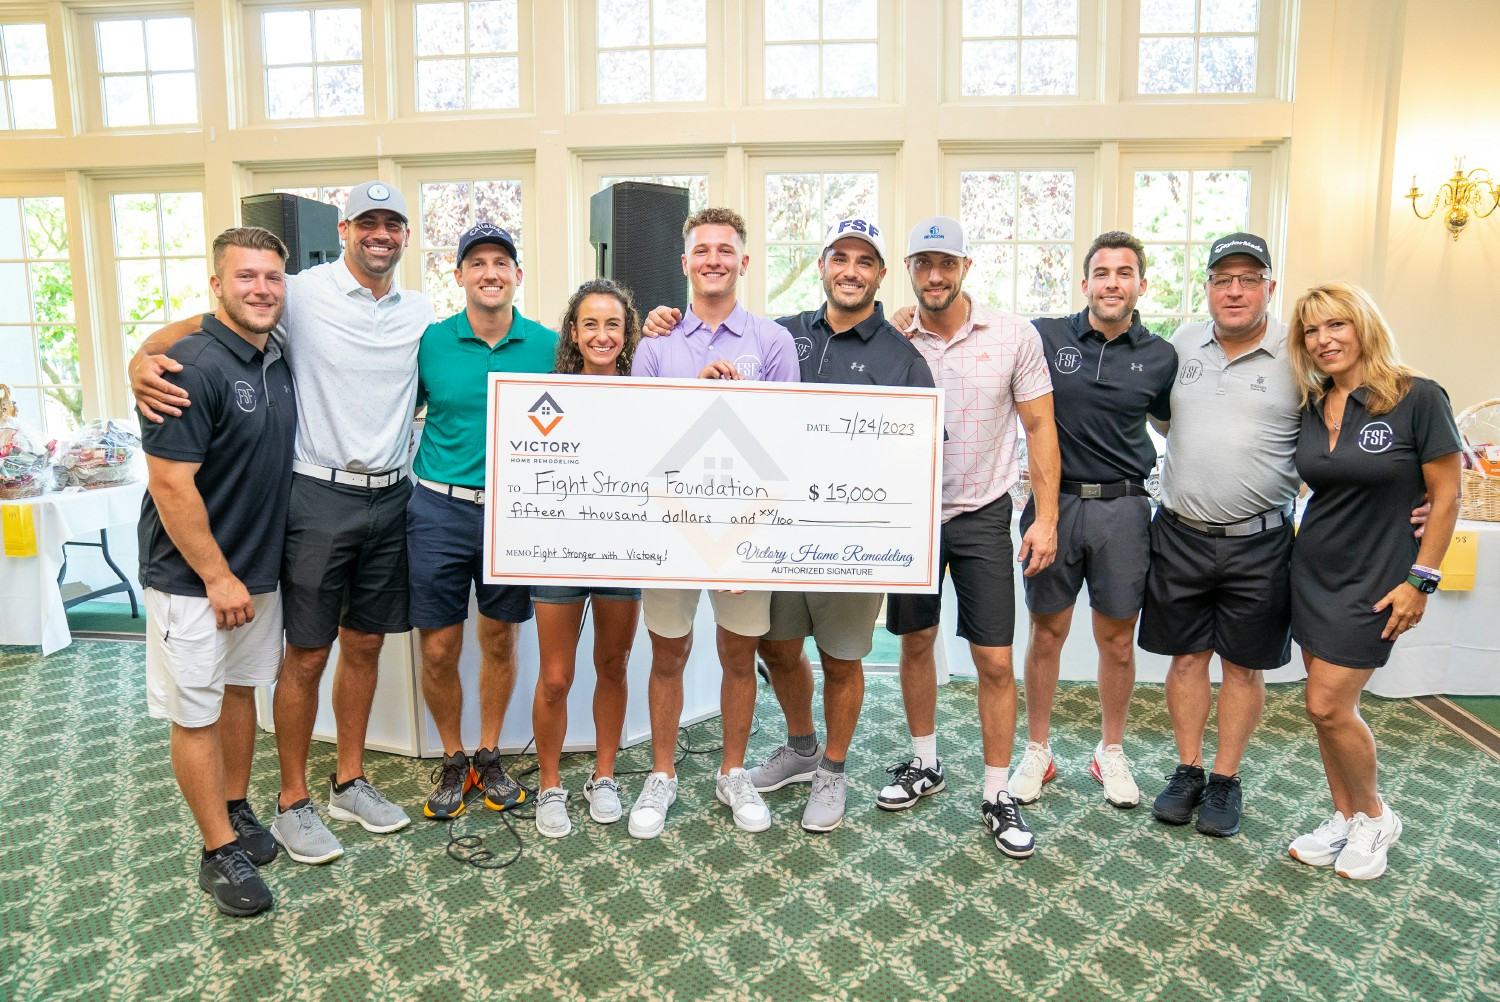 Victory partnered with FightStrong Foundation for their annual golf outing. 